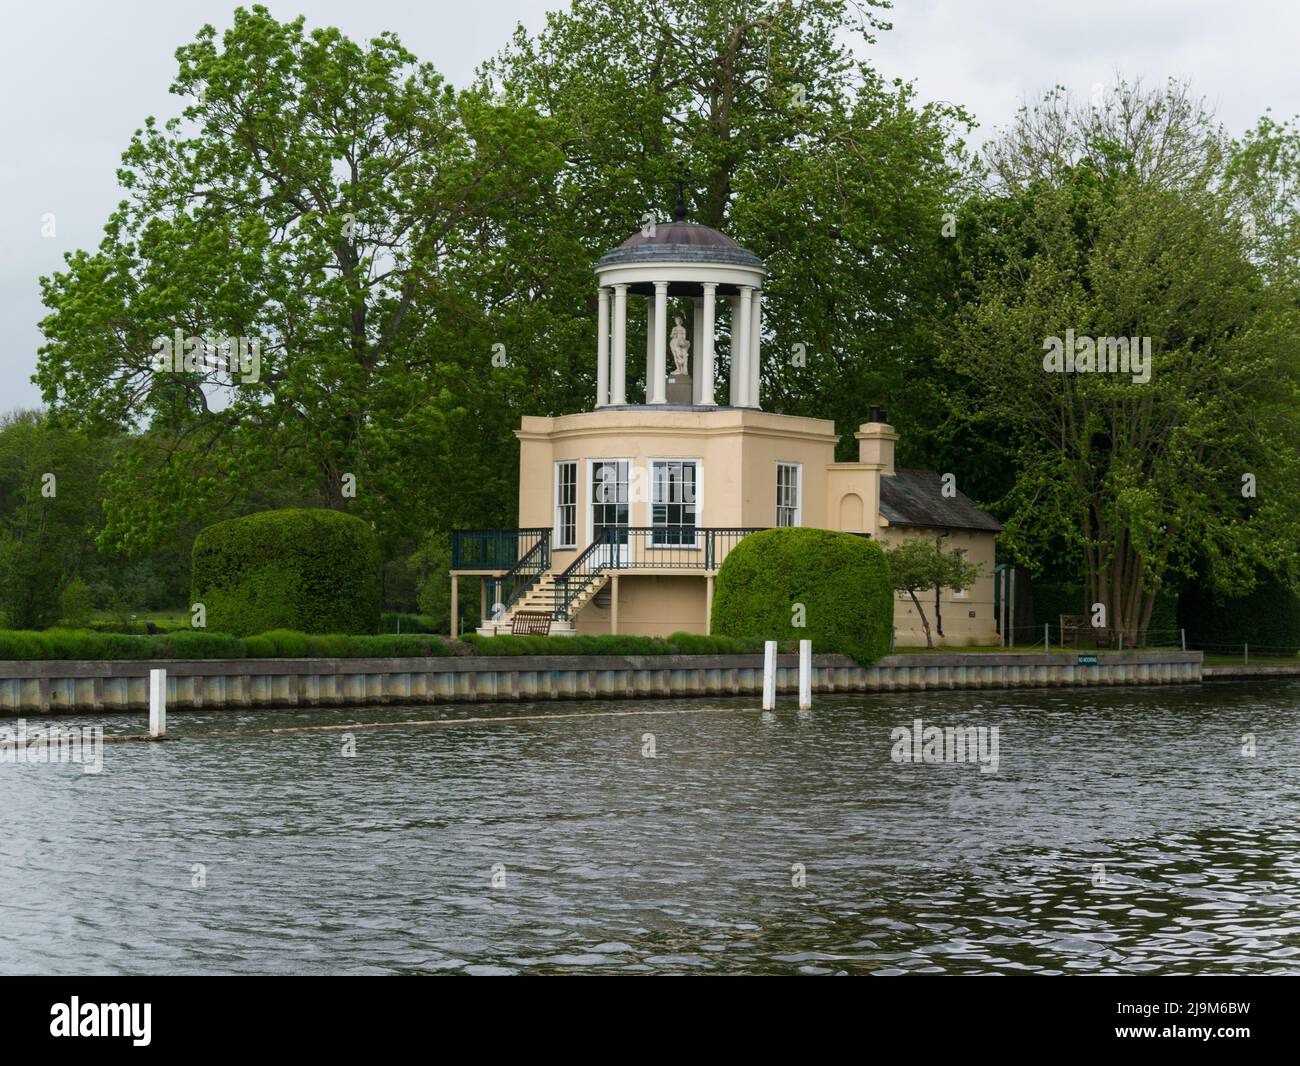 Fawley Temple on Temple Island is an ornamental folly designed by 18thc architect James Wyatt  constructed in 1771 designed as a fishing lodge for Faw Stock Photo